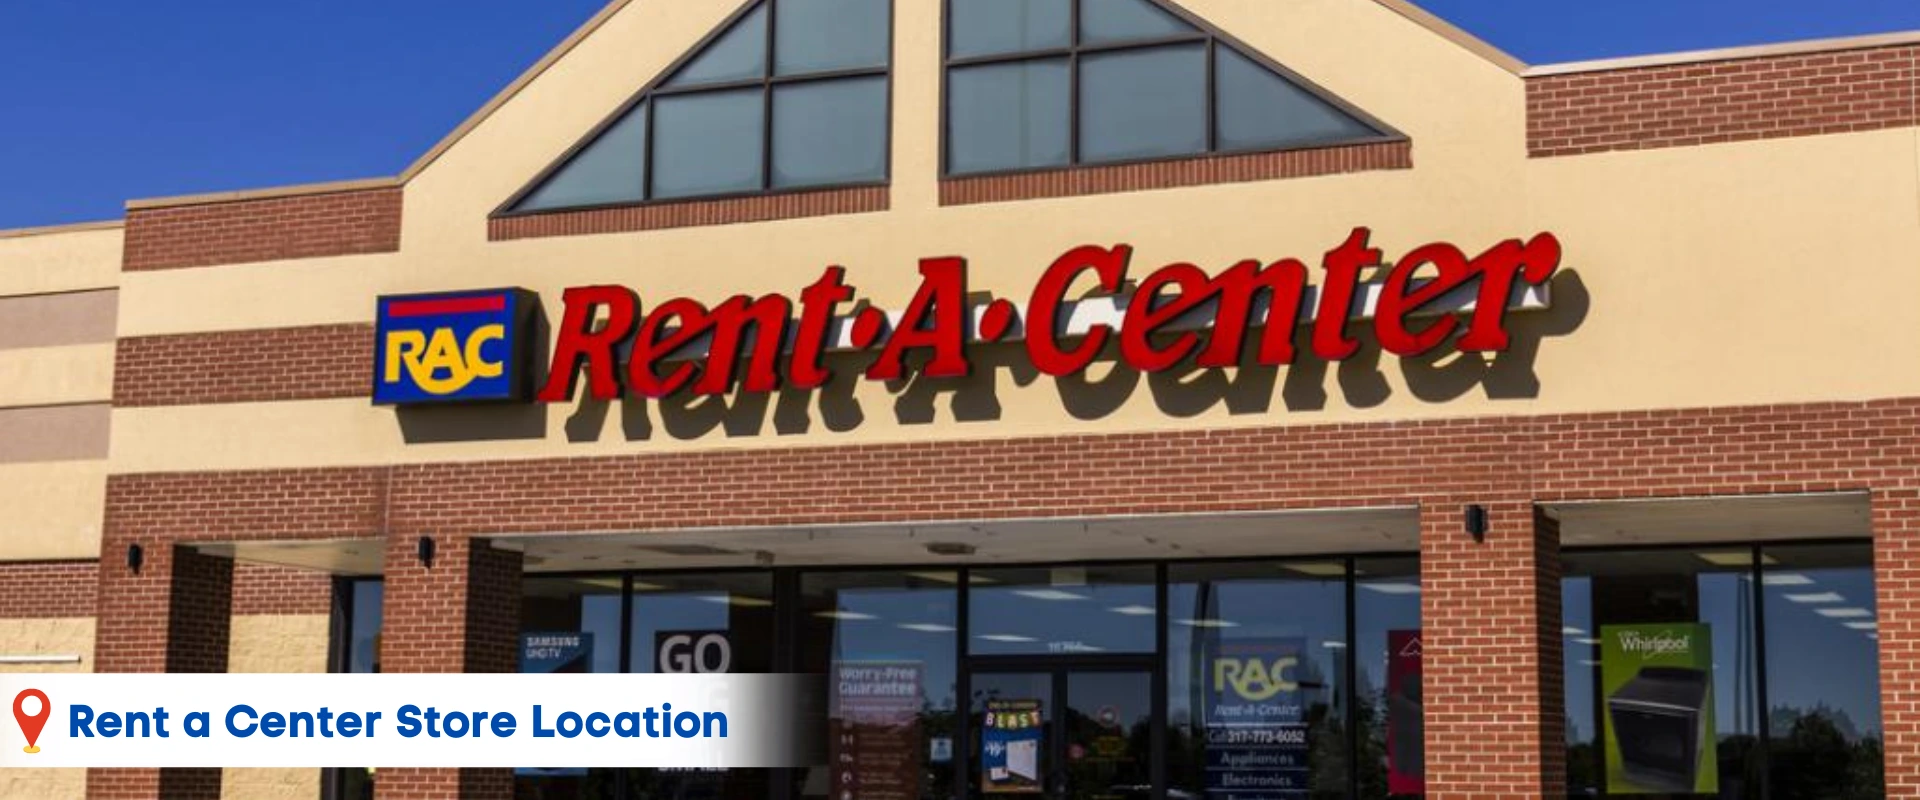 Rent a Center Near Me in Cahokia, IL.